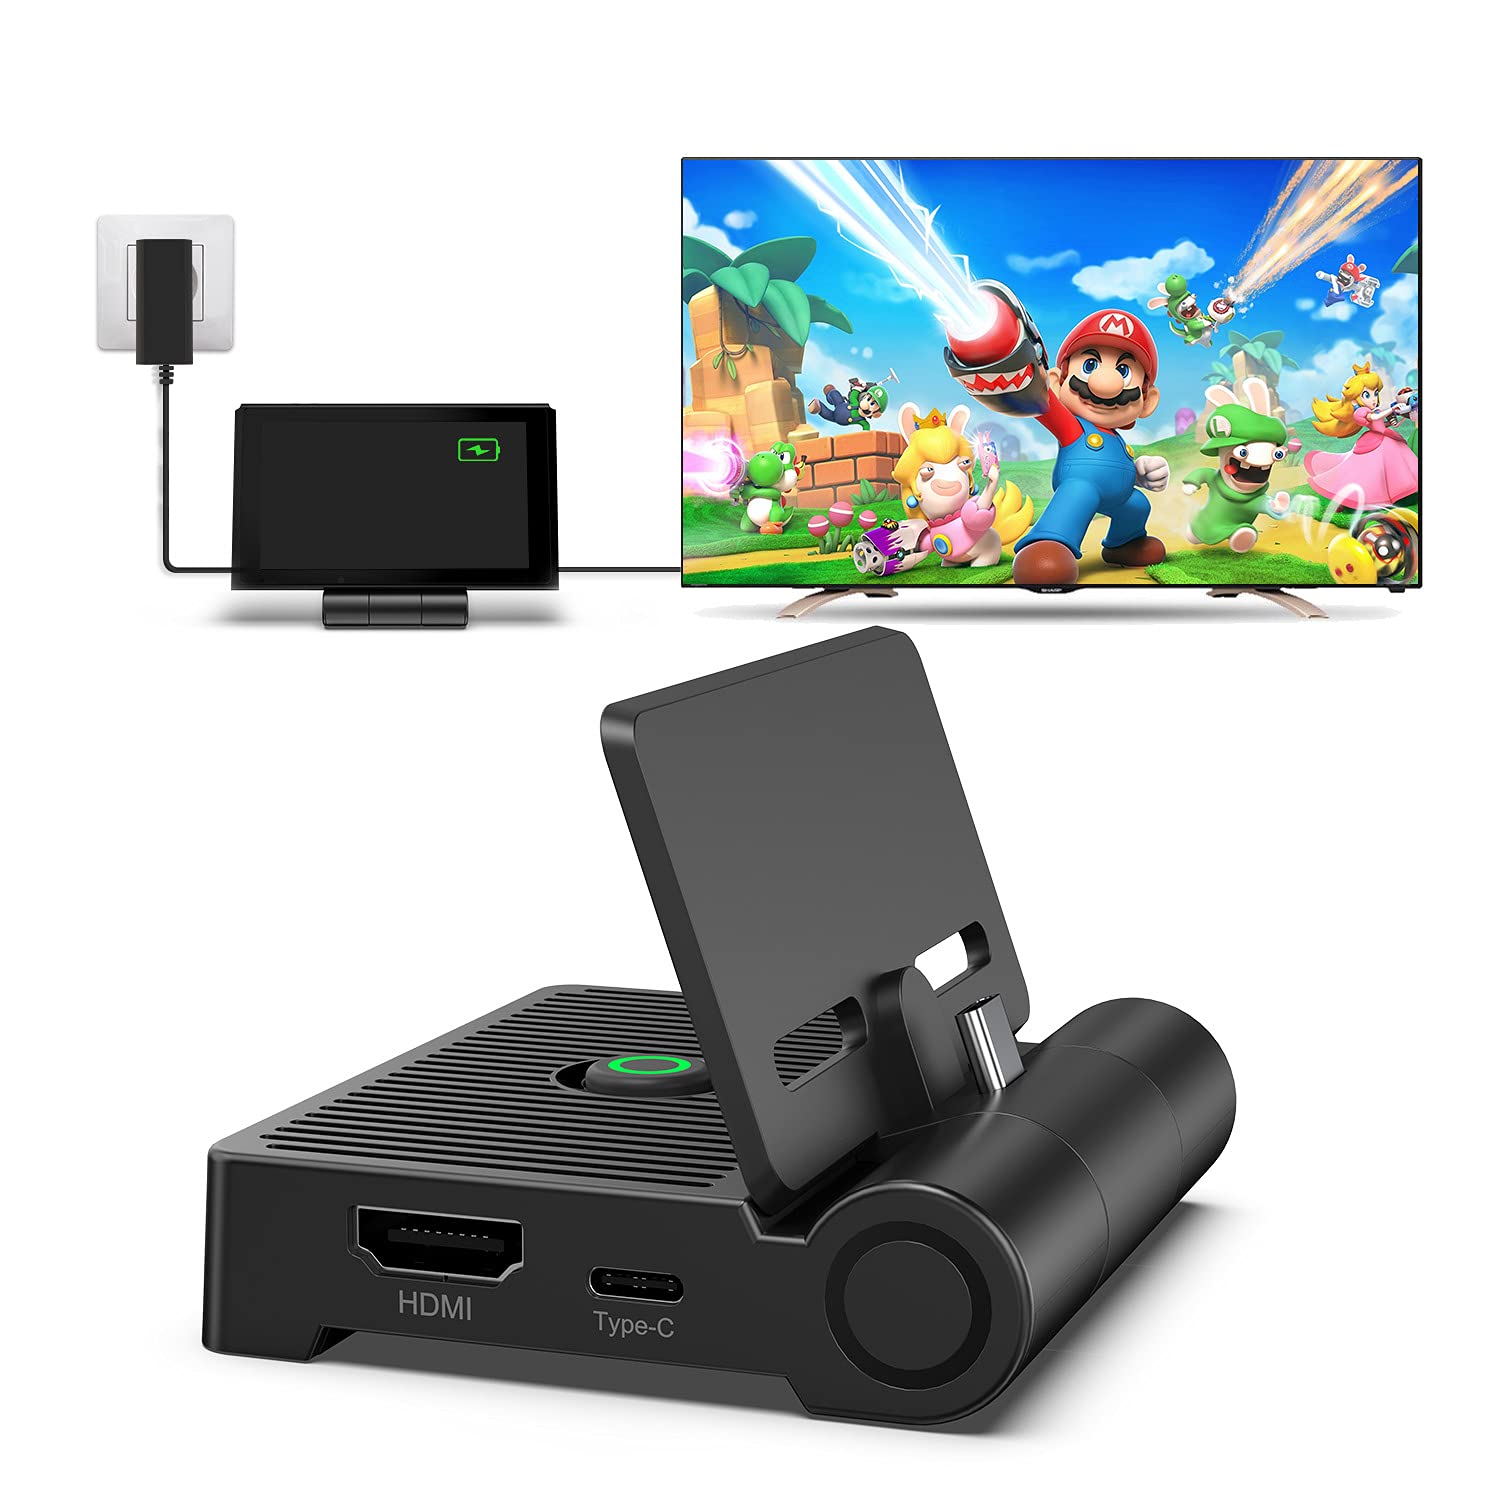 Switch TV Dock for NS Switch/Switch OLED, innoAura Switch Docking Station with Foldable and Portable Design, HDMI, Type-C and USB 3.0 Port